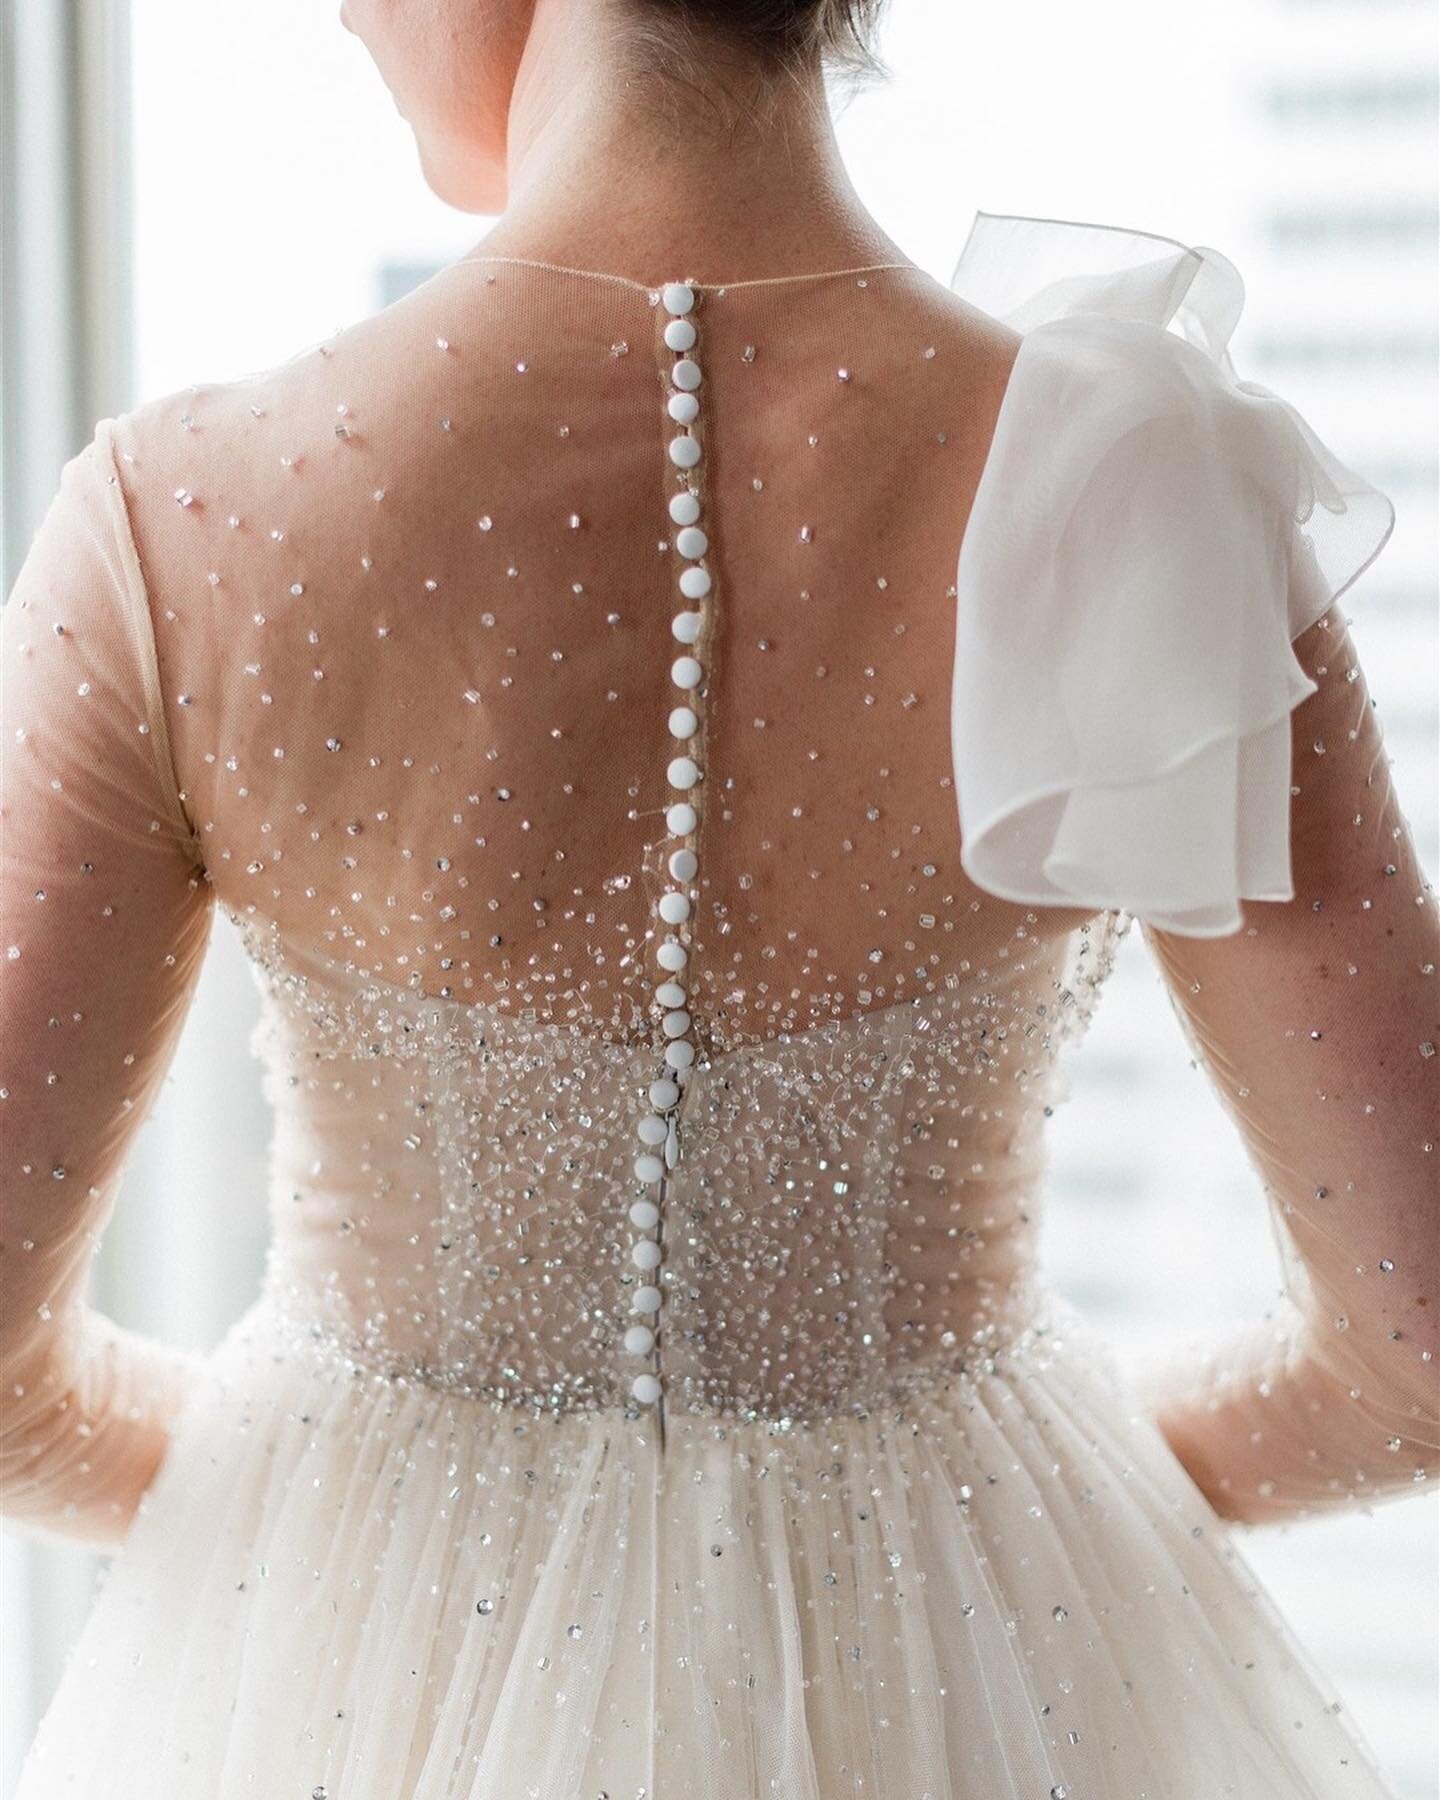 The details of this dress are jaw dropping!  Plus, it had fantastic &lsquo;swish&rsquo; on the dance floor.
.
#torontowedding #torontoweddingphotography #torontoweddingphotographer #onekingwest #onekingwestwedding #collingwoodweddingphotography #coll